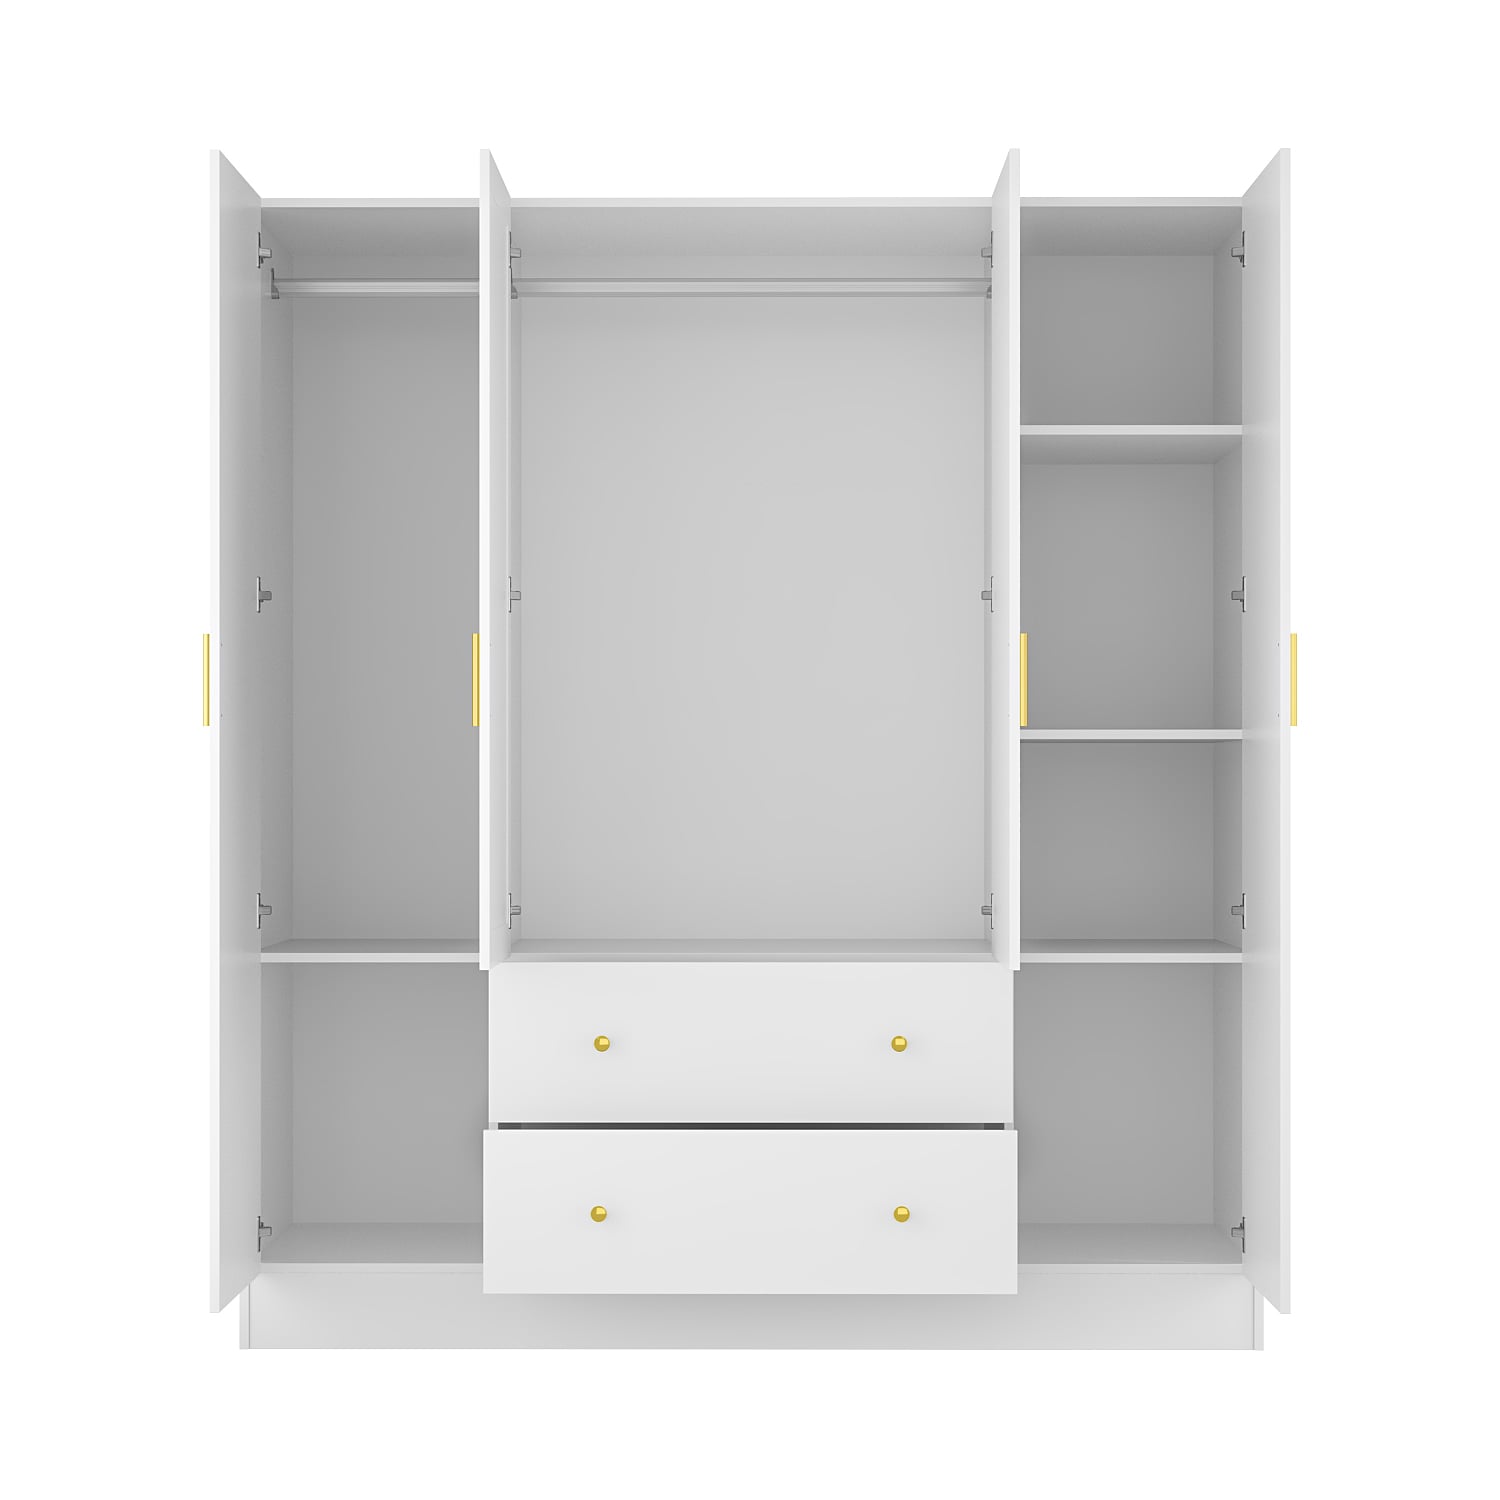 FUFU&GAGA Contemporary 3-Door Wardrobe Closet with 4 Shelves and Hanging Rod - White Finish, Assembly Required | J-JX0151-01+02